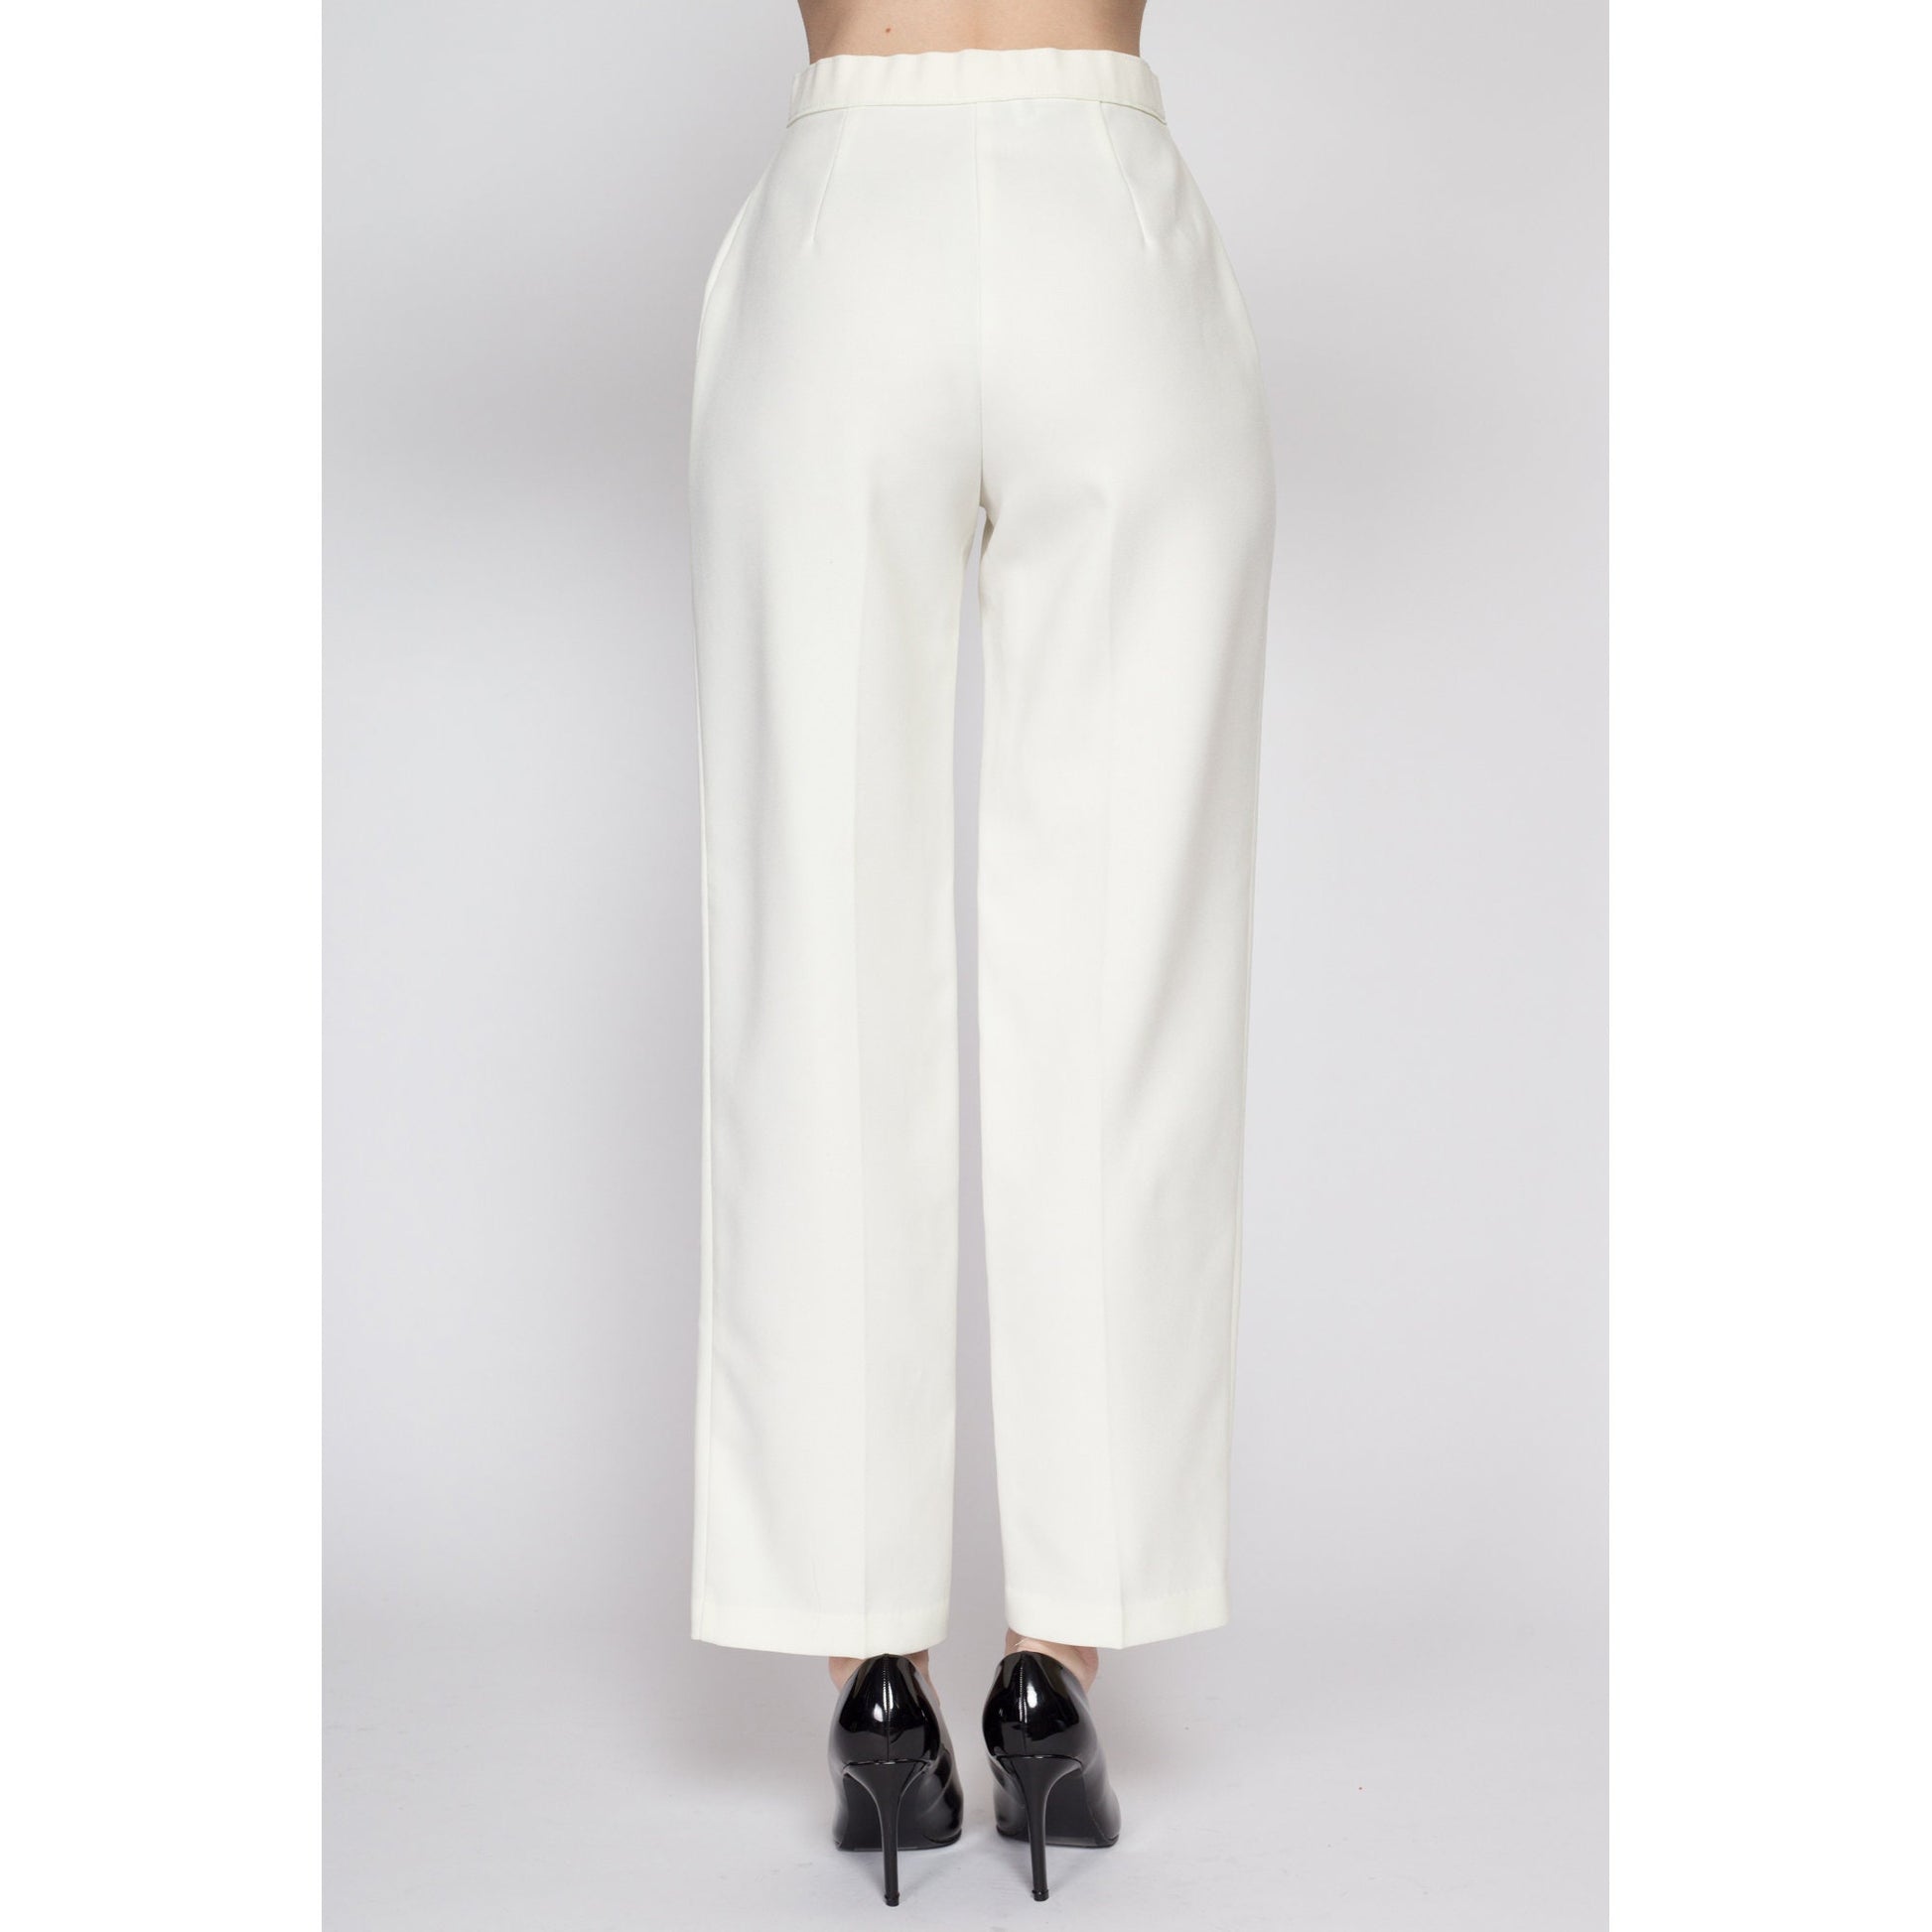 Small 70s Levi's White High Waisted Pants 25.5 – Flying Apple Vintage